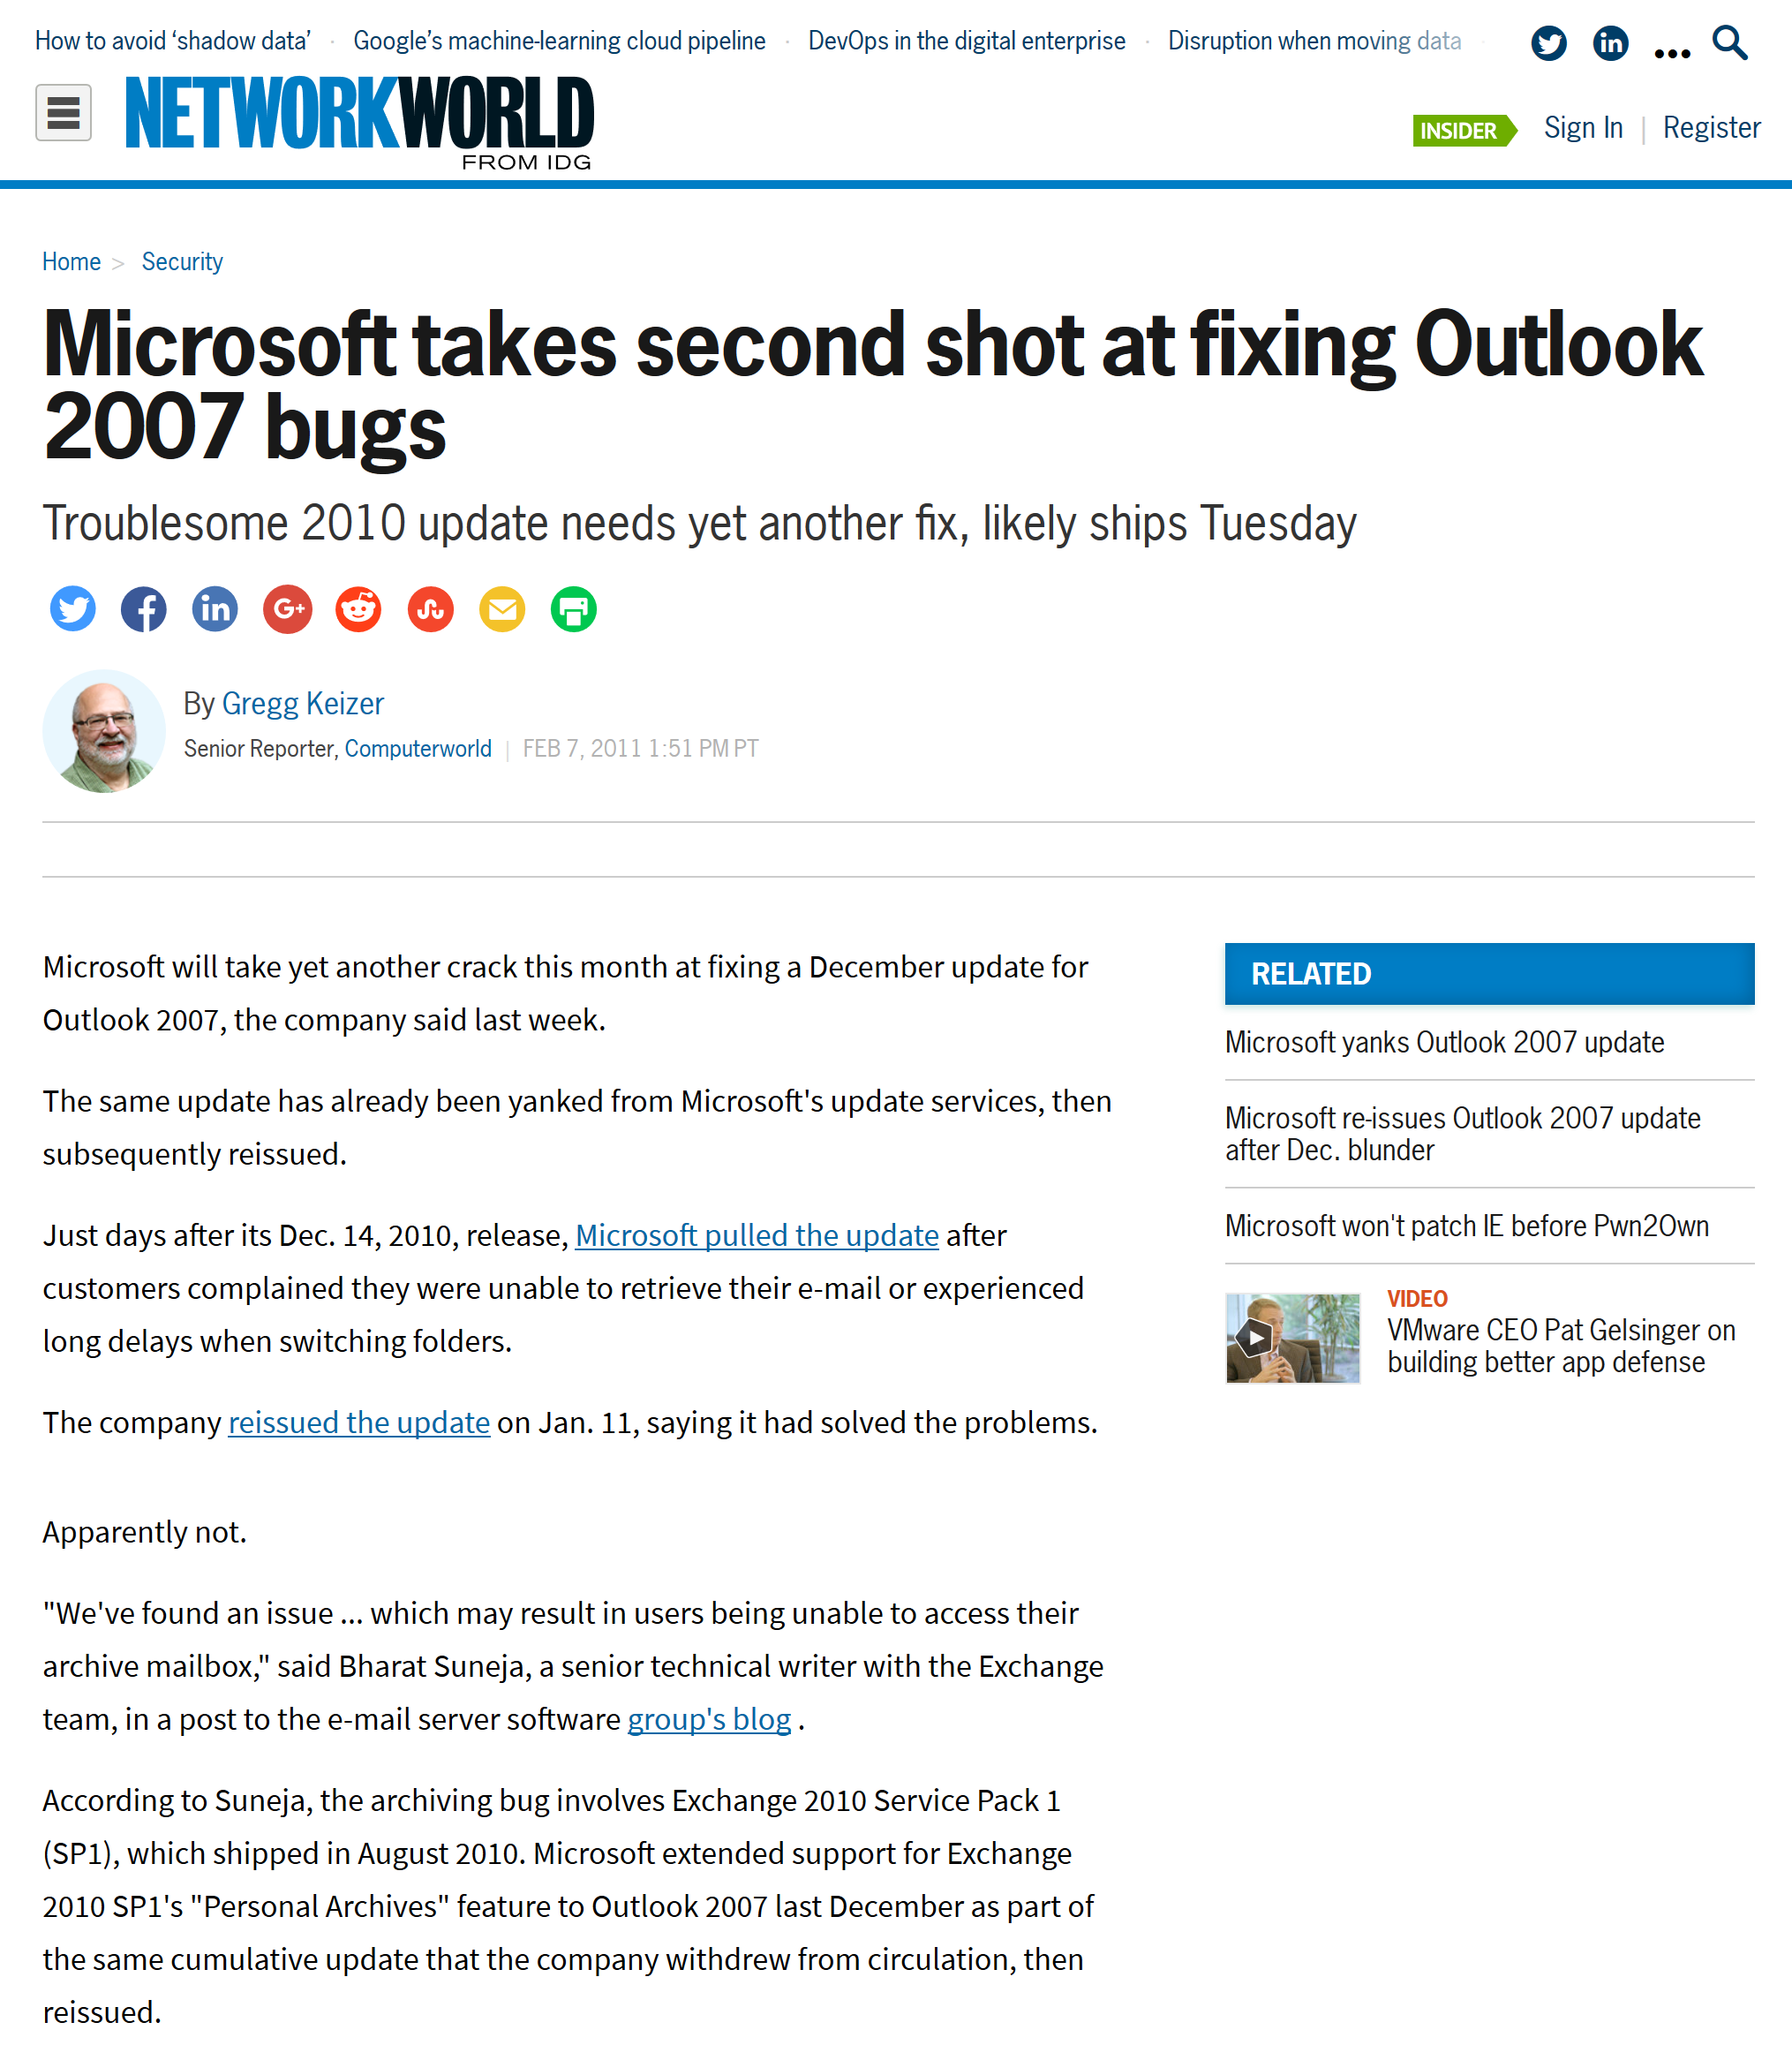 Networkworld: Microsoft takes second shot at fixing Outlook 2007 bugs